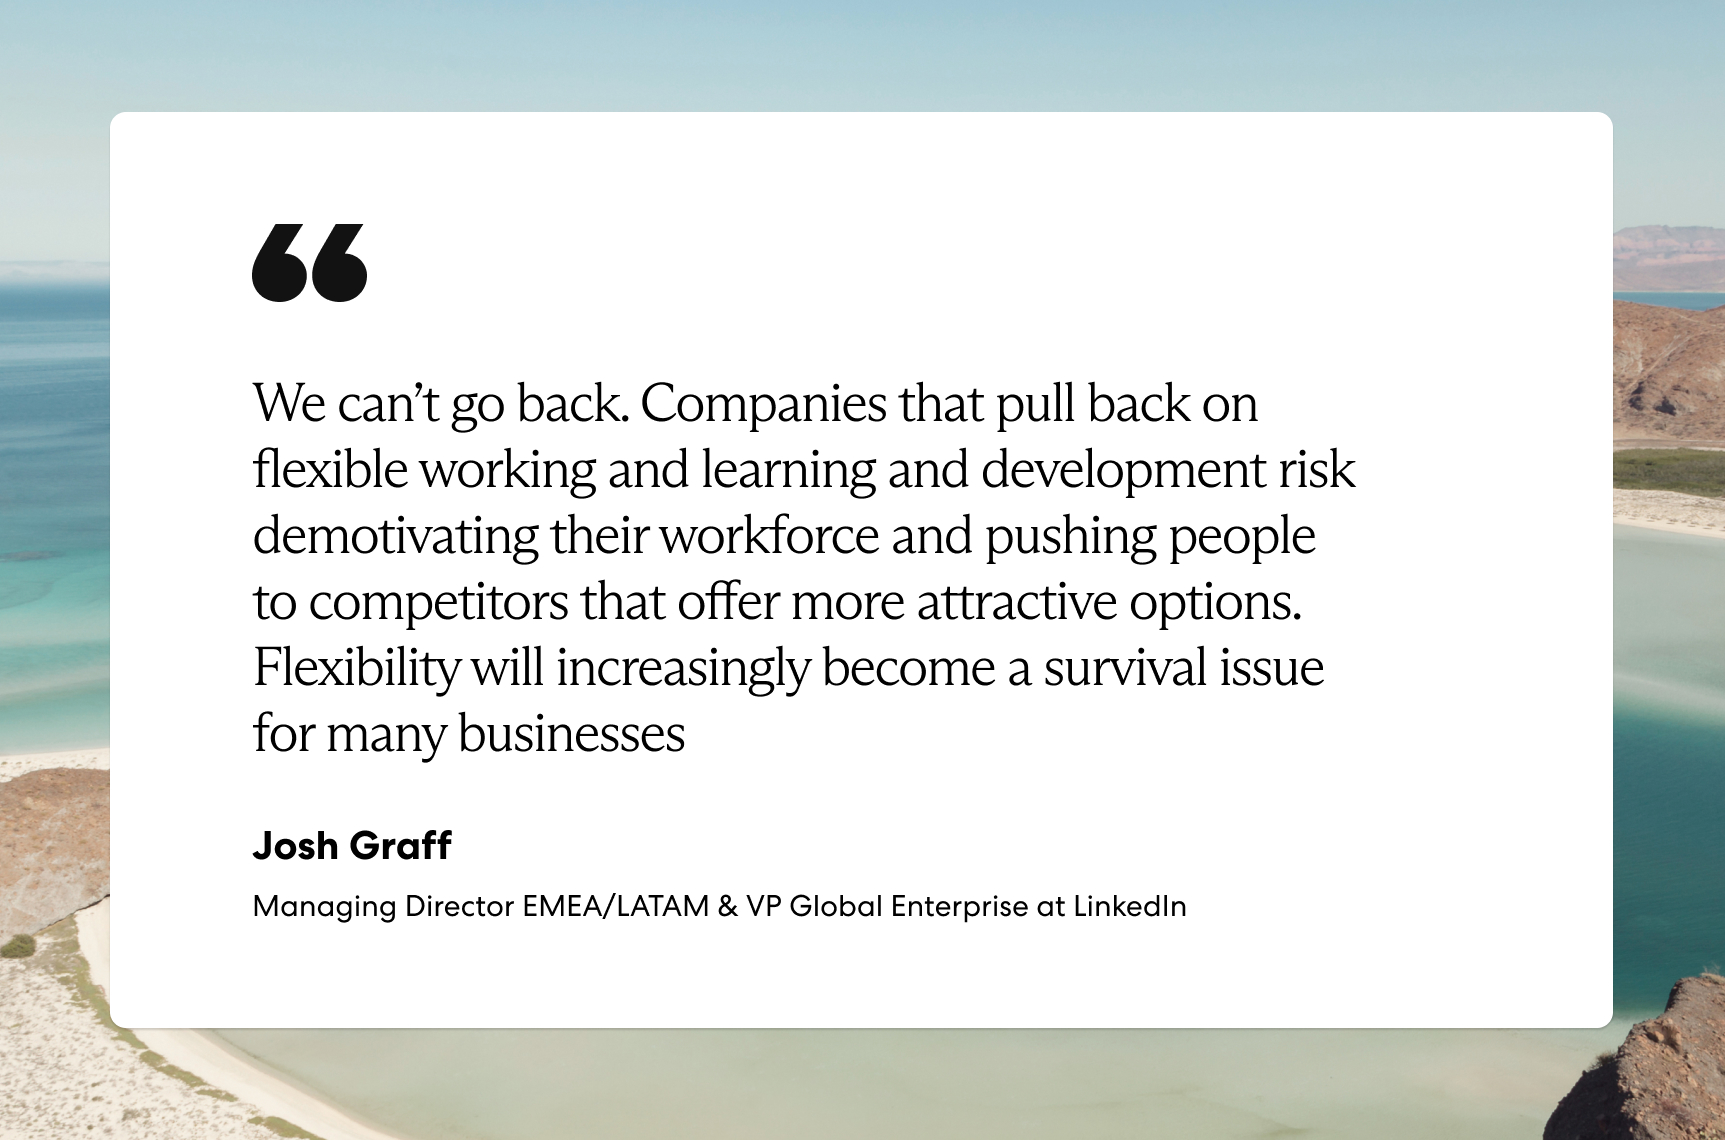 “We can’t go back. Companies that pull back on flexible working and learning and development risk demotivating their workforce and pushing people to competitors that offer more attractive options. Flexibility will increasingly become a survival issue for many businesses.” —Josh Graff, Managing Director EMEA/LATAM & VP Global Enterprise at LinkedIn